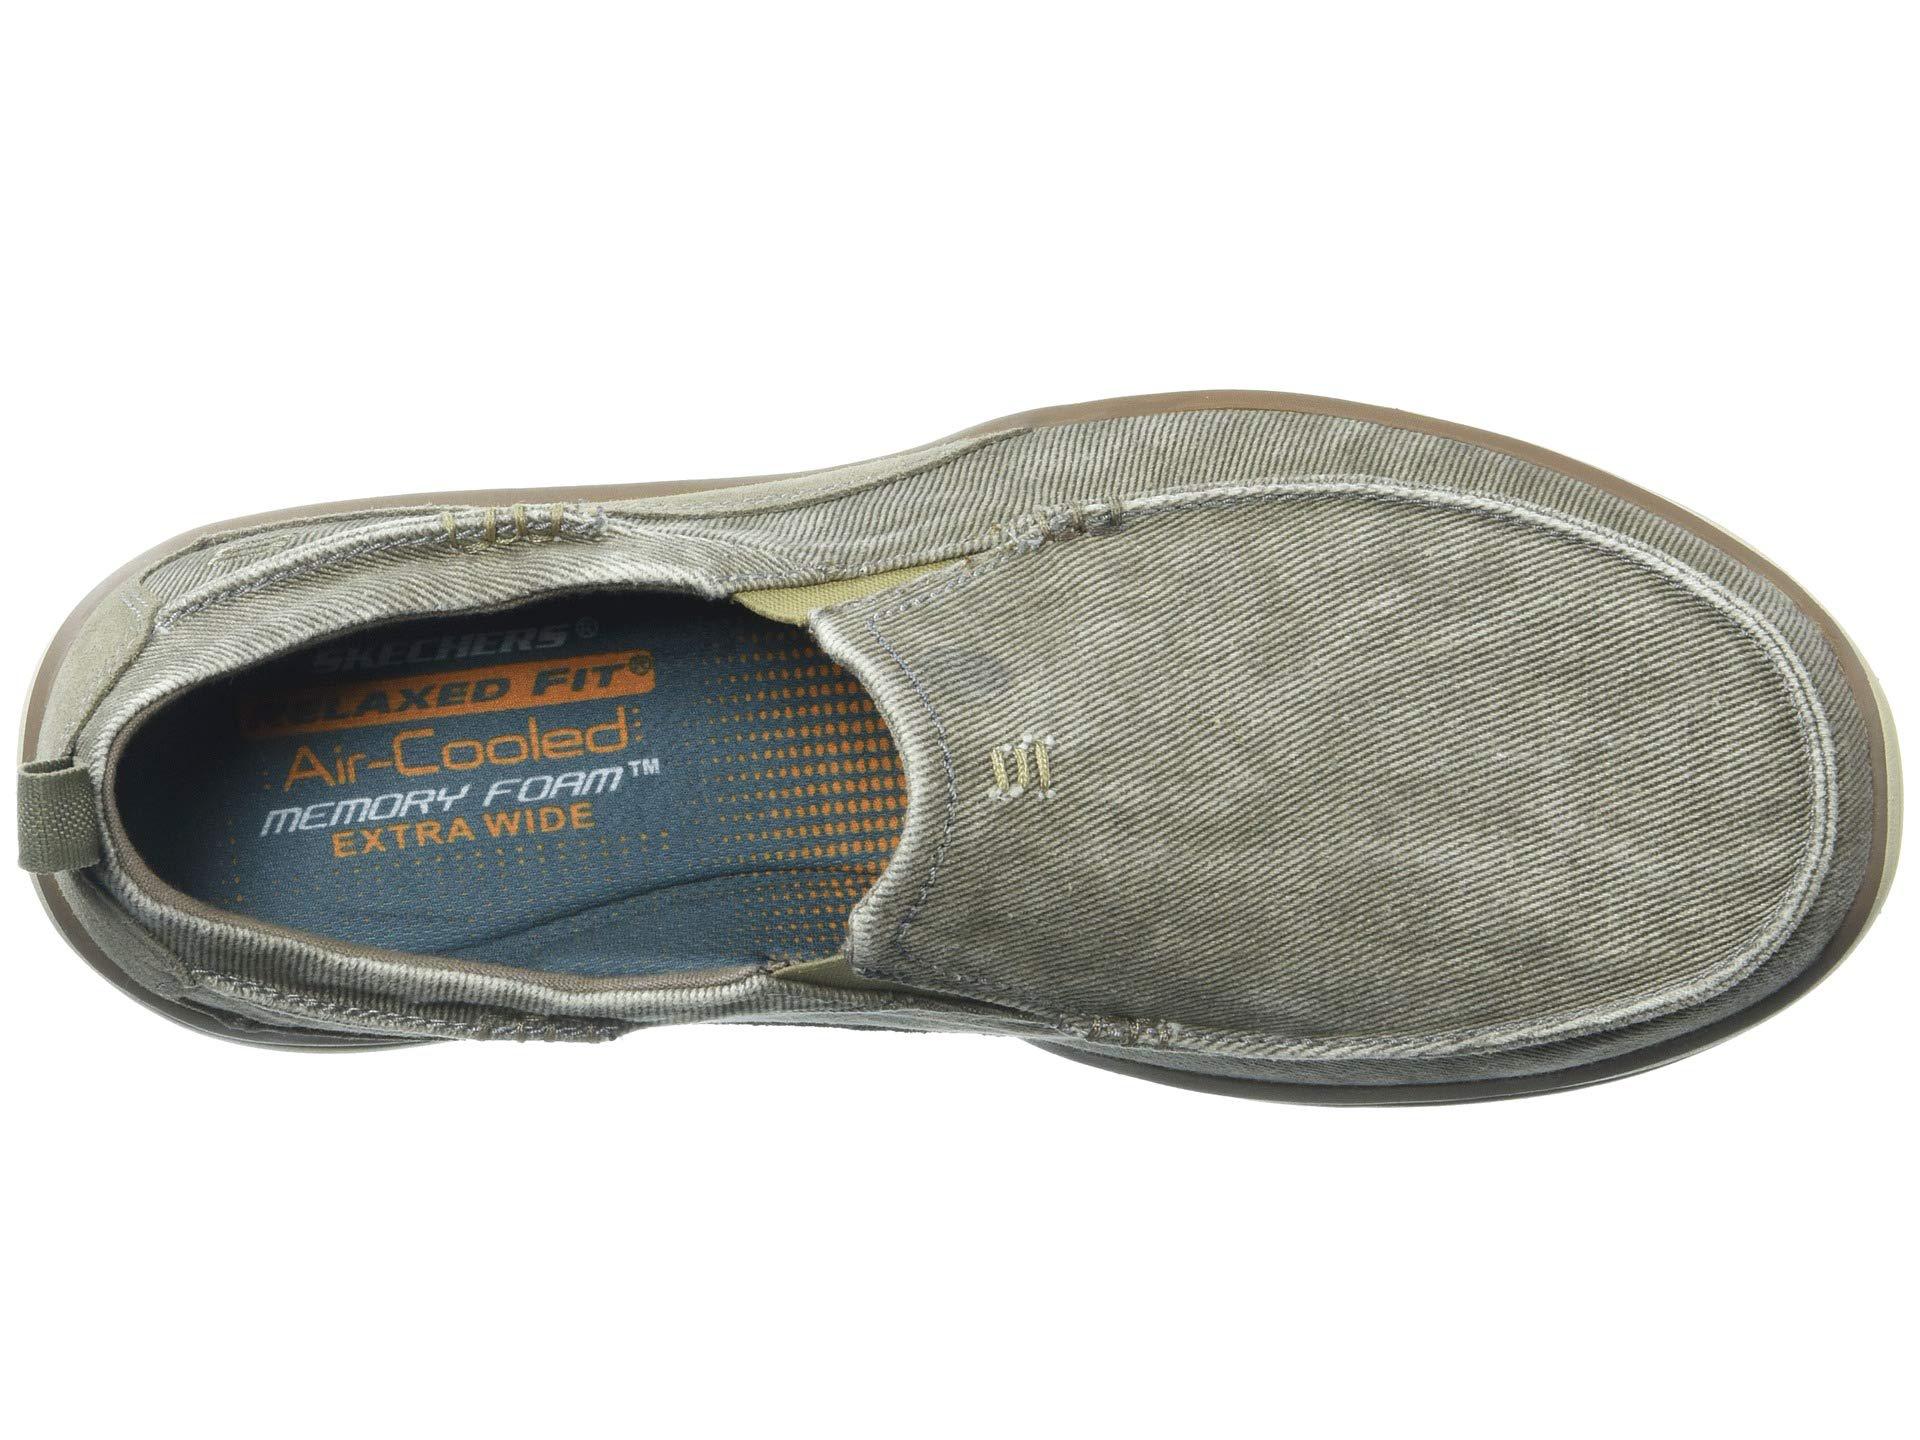 skechers canvas loafers